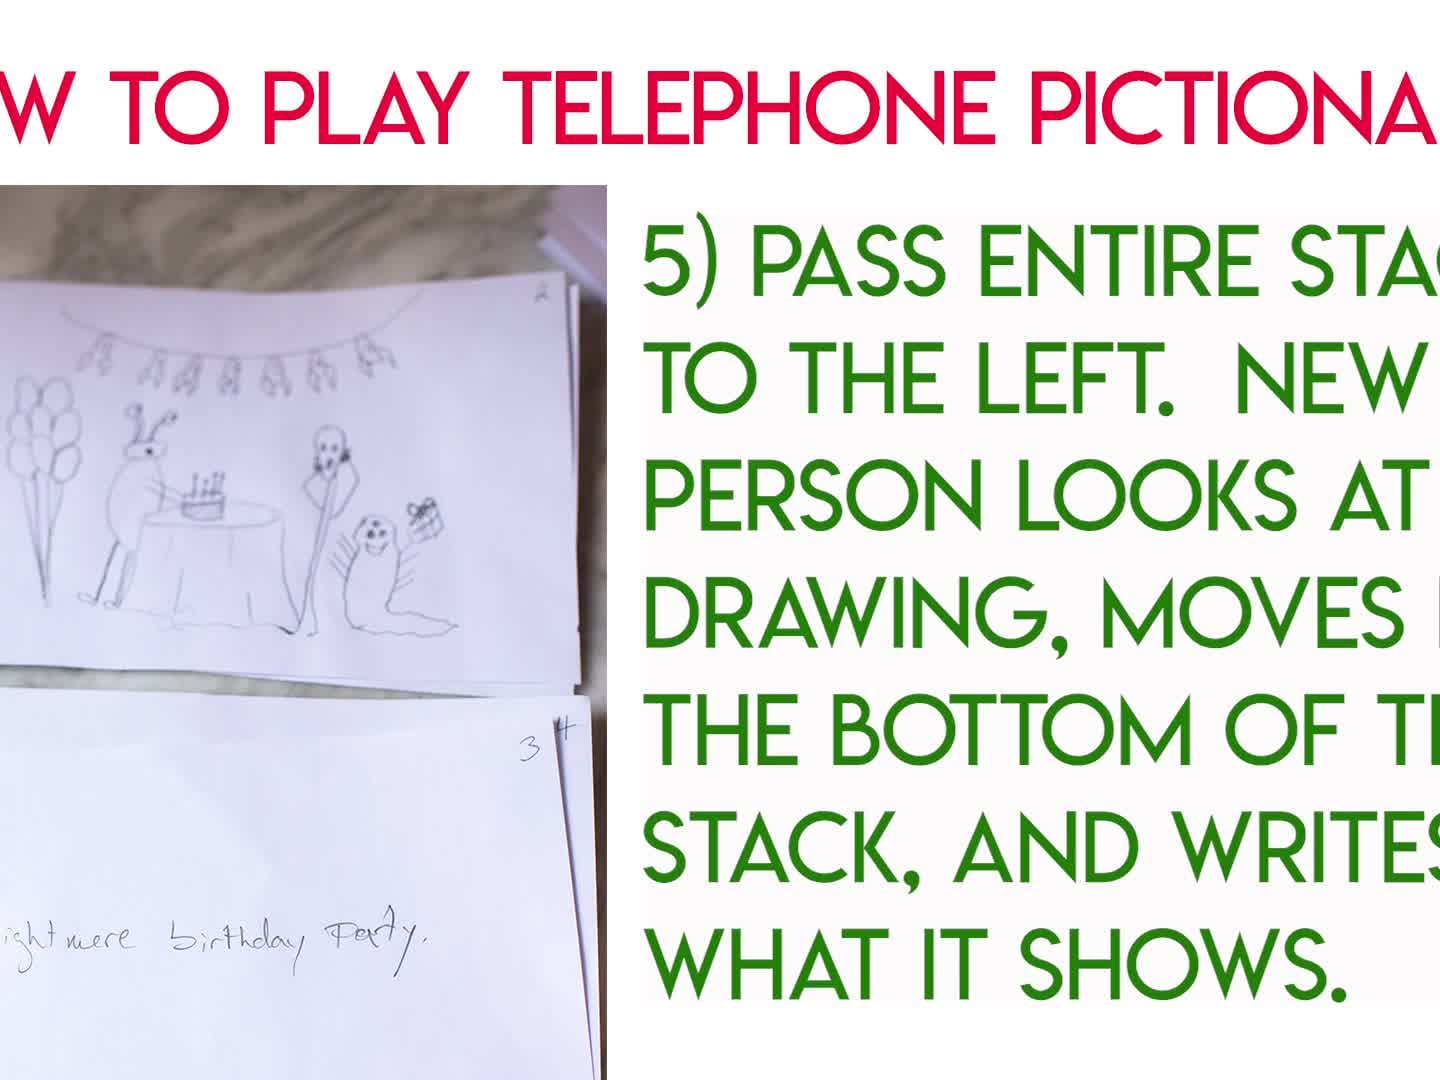 Telephone Pictionary: The BEST party game for Adults and kids! 